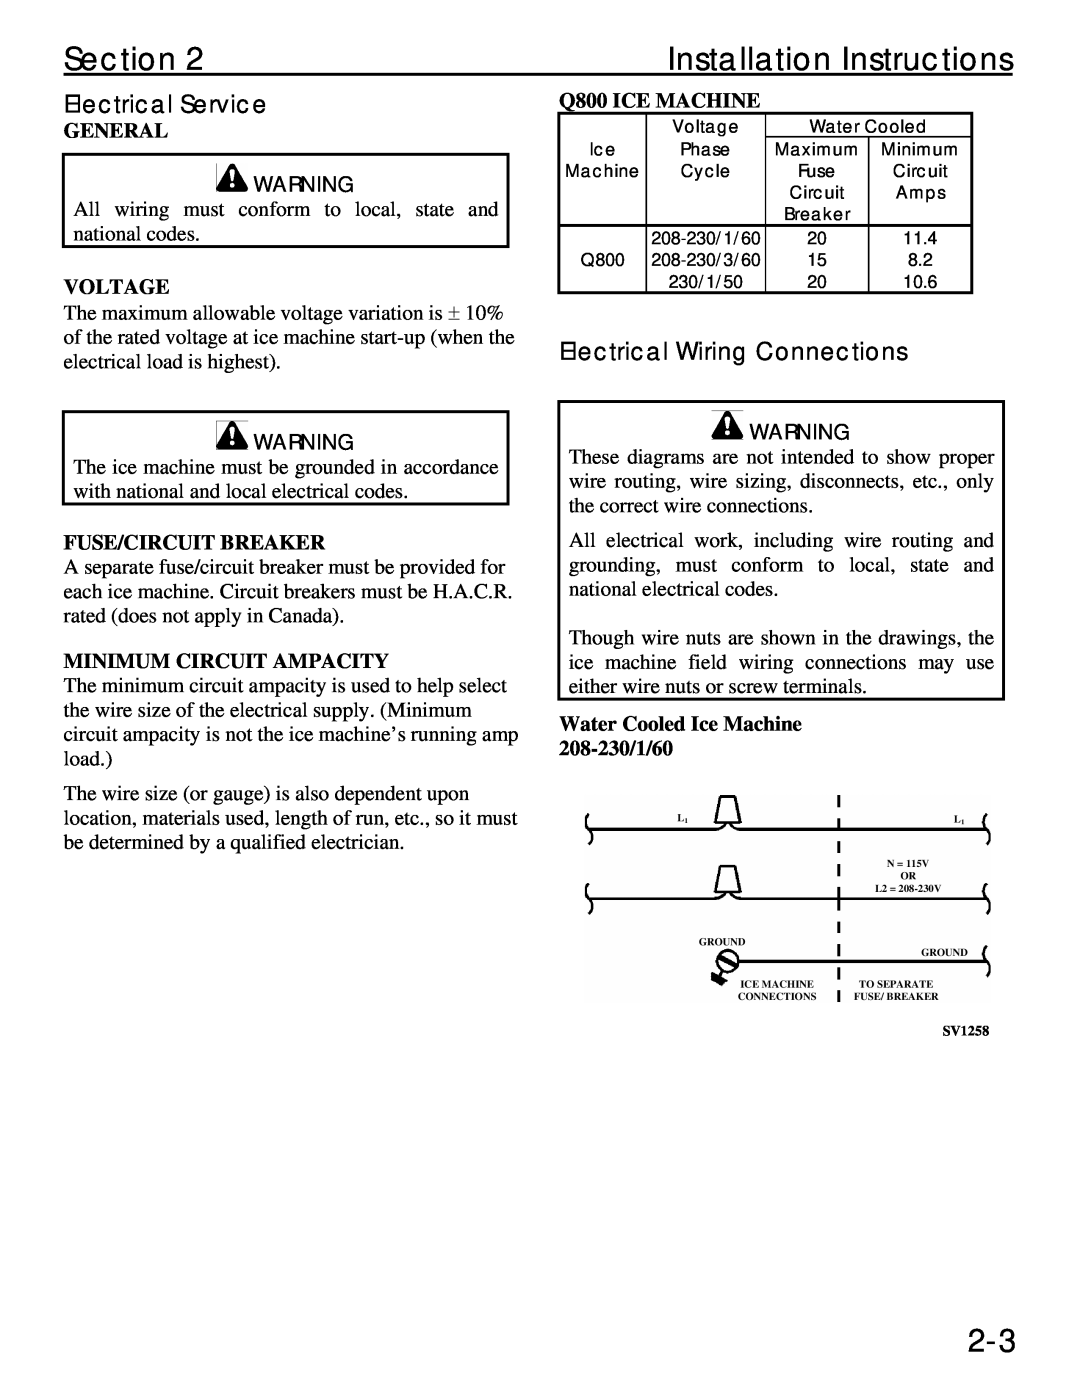 Manitowoc Ice Q 800 manual Installation Instructions, Electrical Service, Electrical Wiring Connections, Voltage, Section 